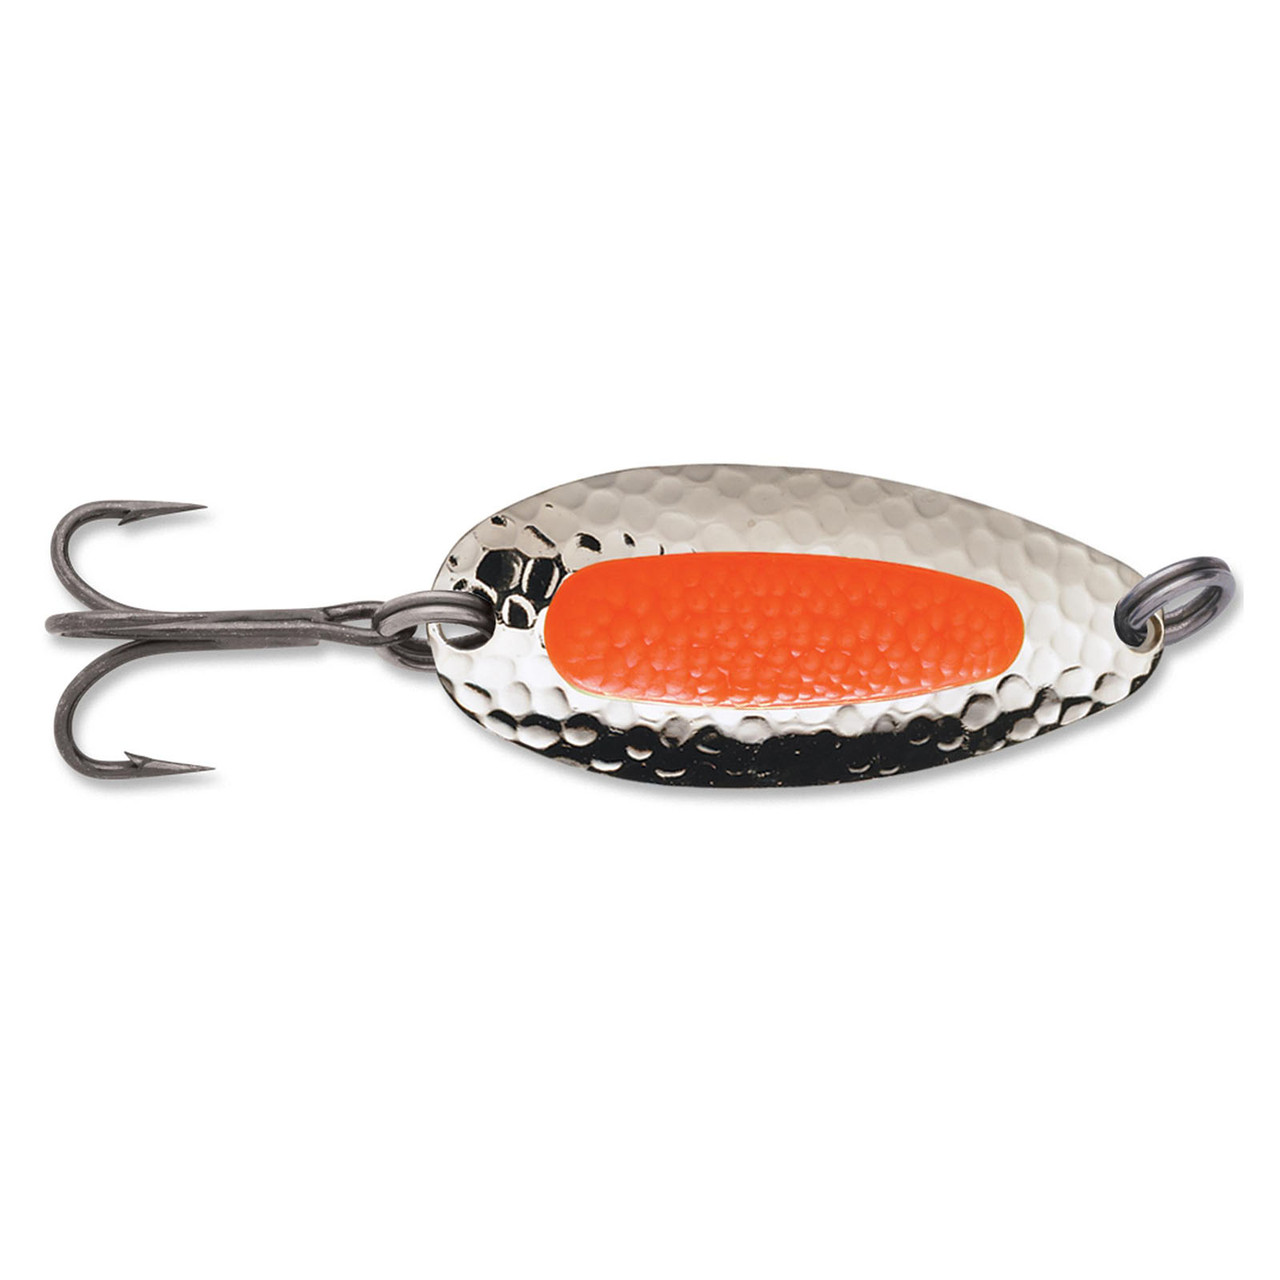 About Morpho fishing premium trout fishing spoons - French Touch Tackle